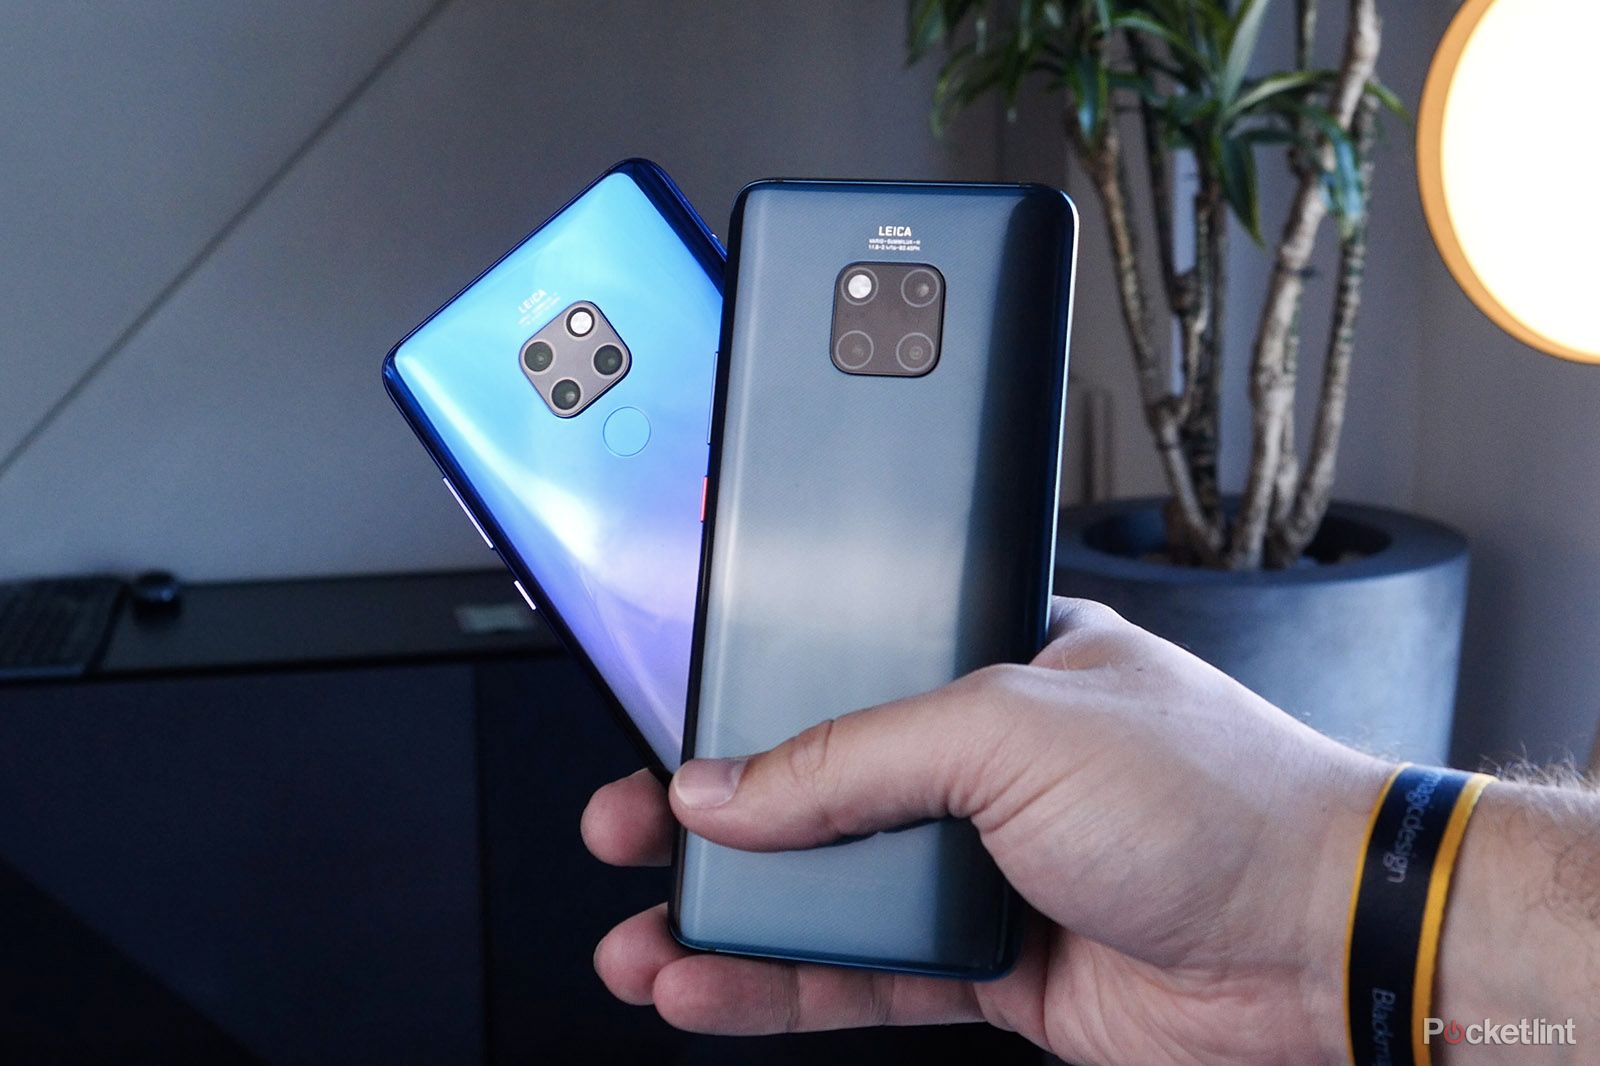 Reasons to buy the Huawei Mate 20 Pro and Huawei Mate 20 Lite image 1